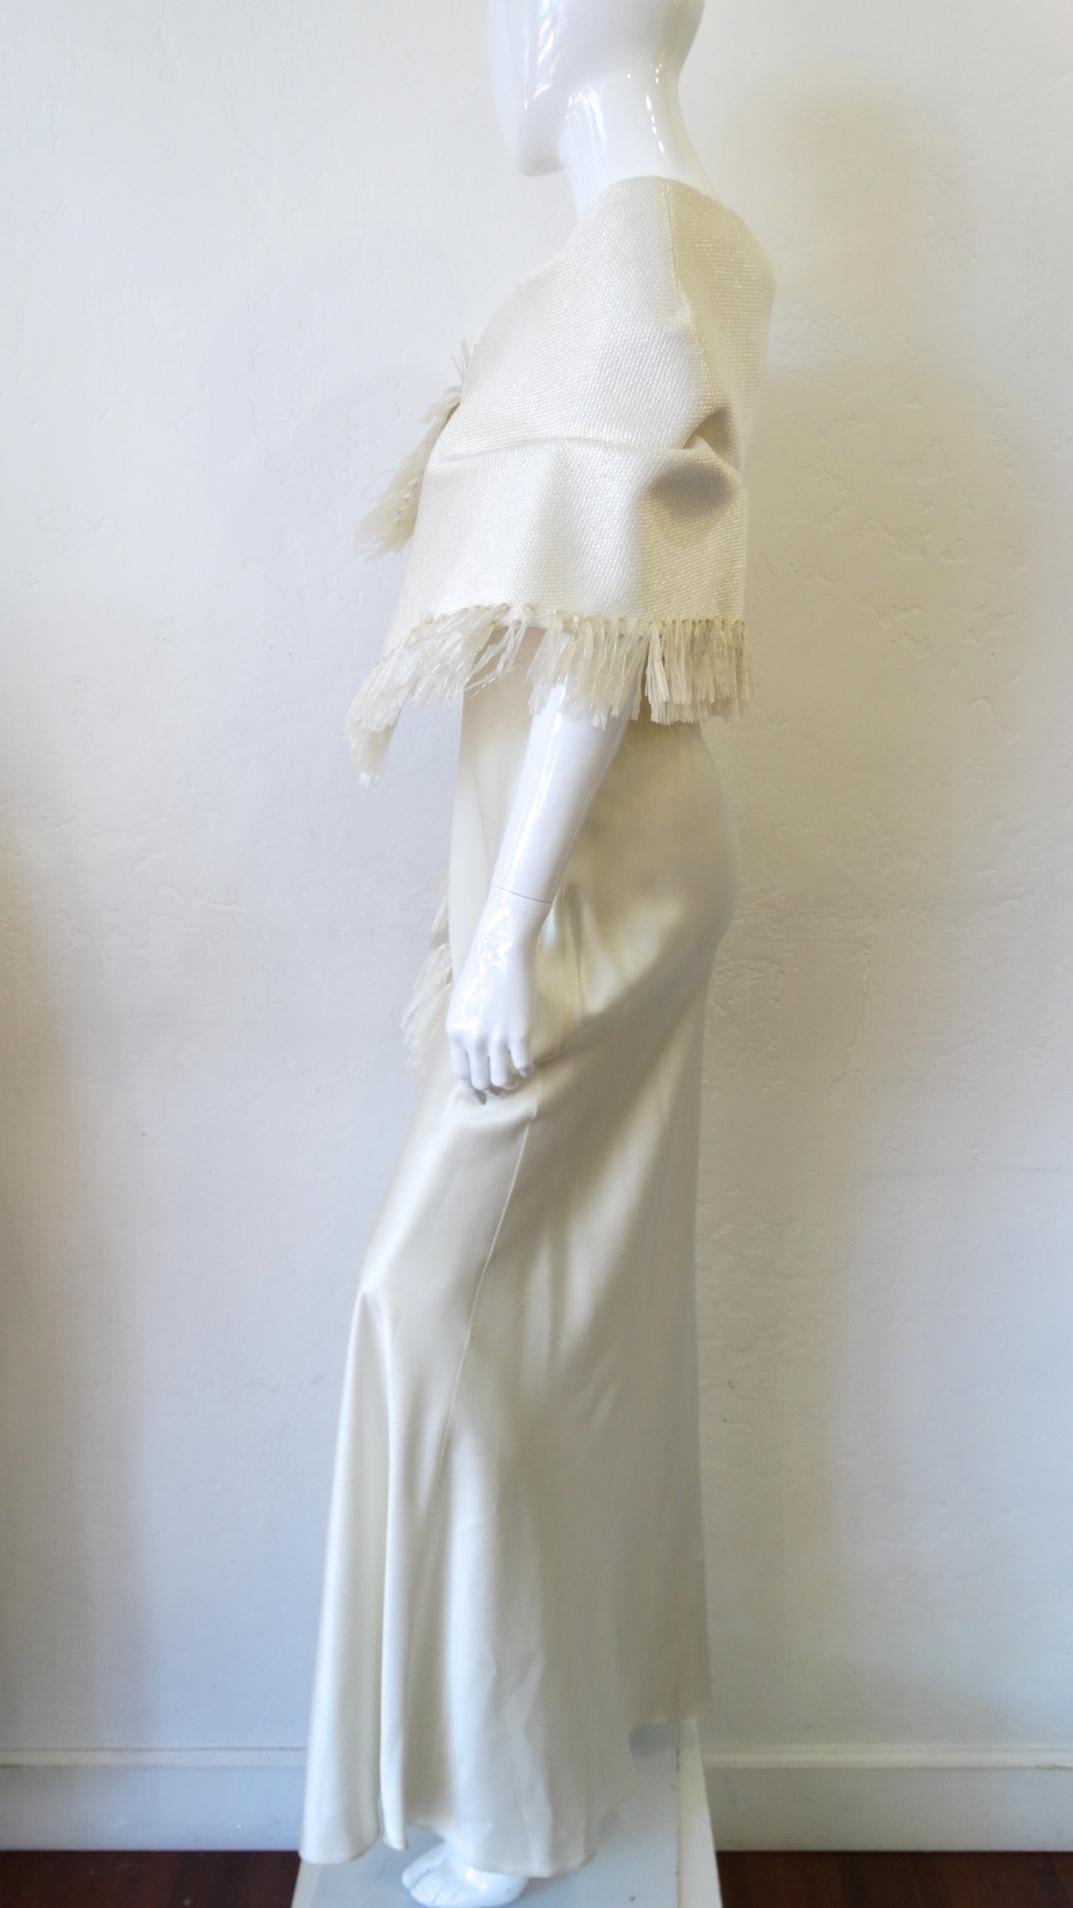 All Eyes Will Be On You In This John Galliano Dress! Circa 1990s, this floor length dress is a gorgeous soft creamy white color and flows effortlessly. Features an elegant square neck and is decorated with raffia accents on the inside trim which